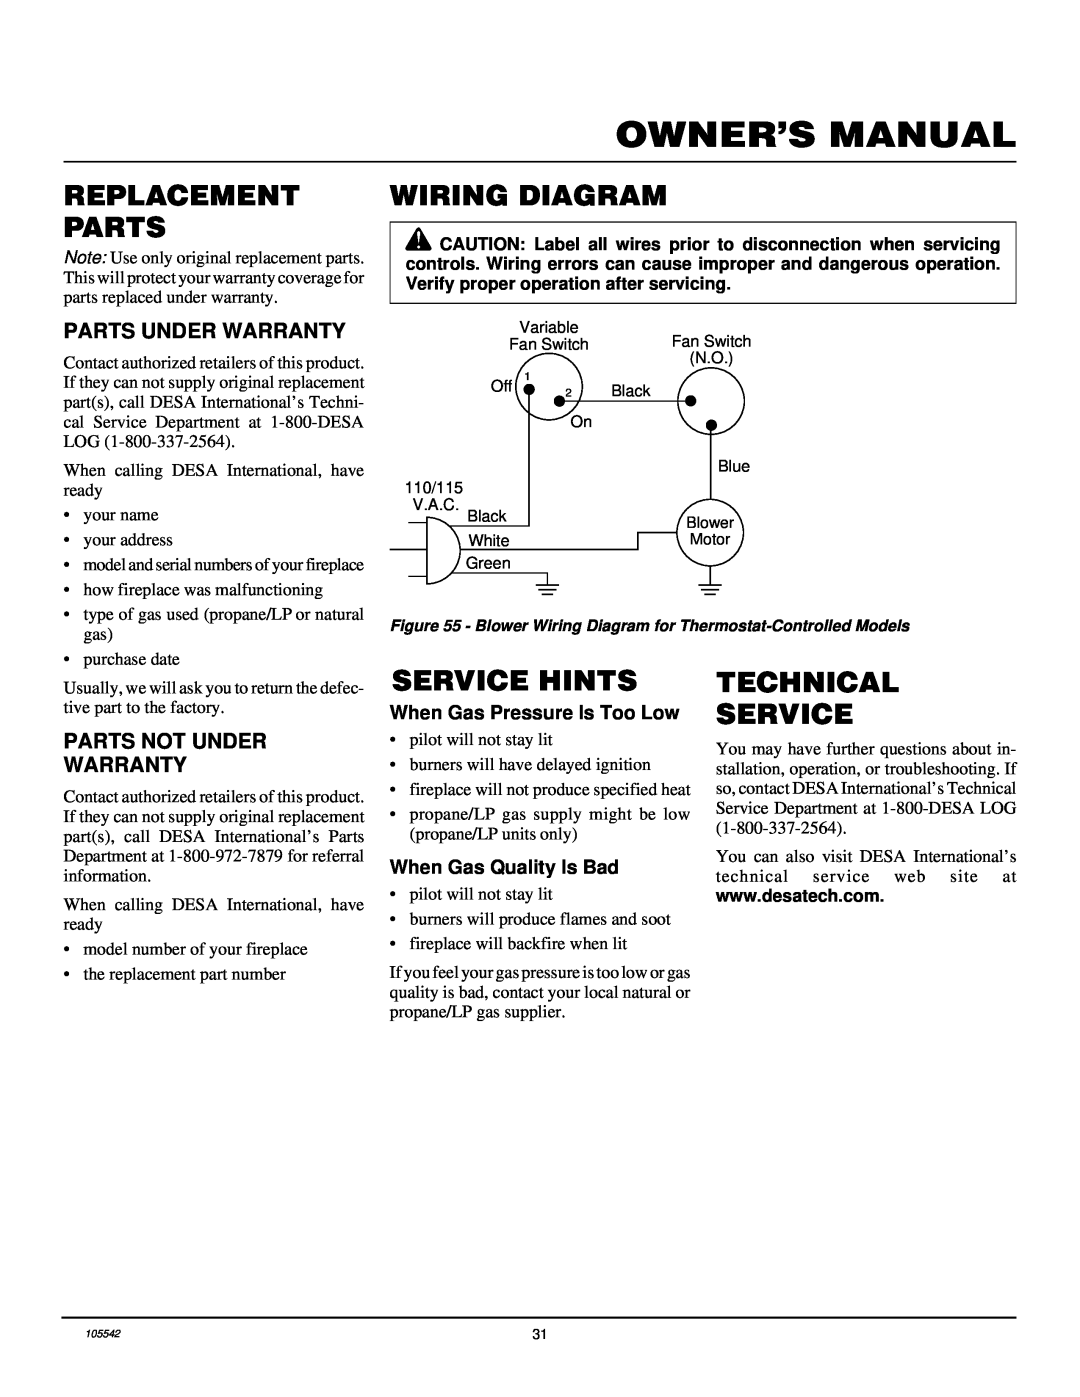 Desa CHDV41N/P Replacement Parts, Wiring Diagram, Service Hints, Technical Service, Parts Under Warranty, Owner’S Manual 